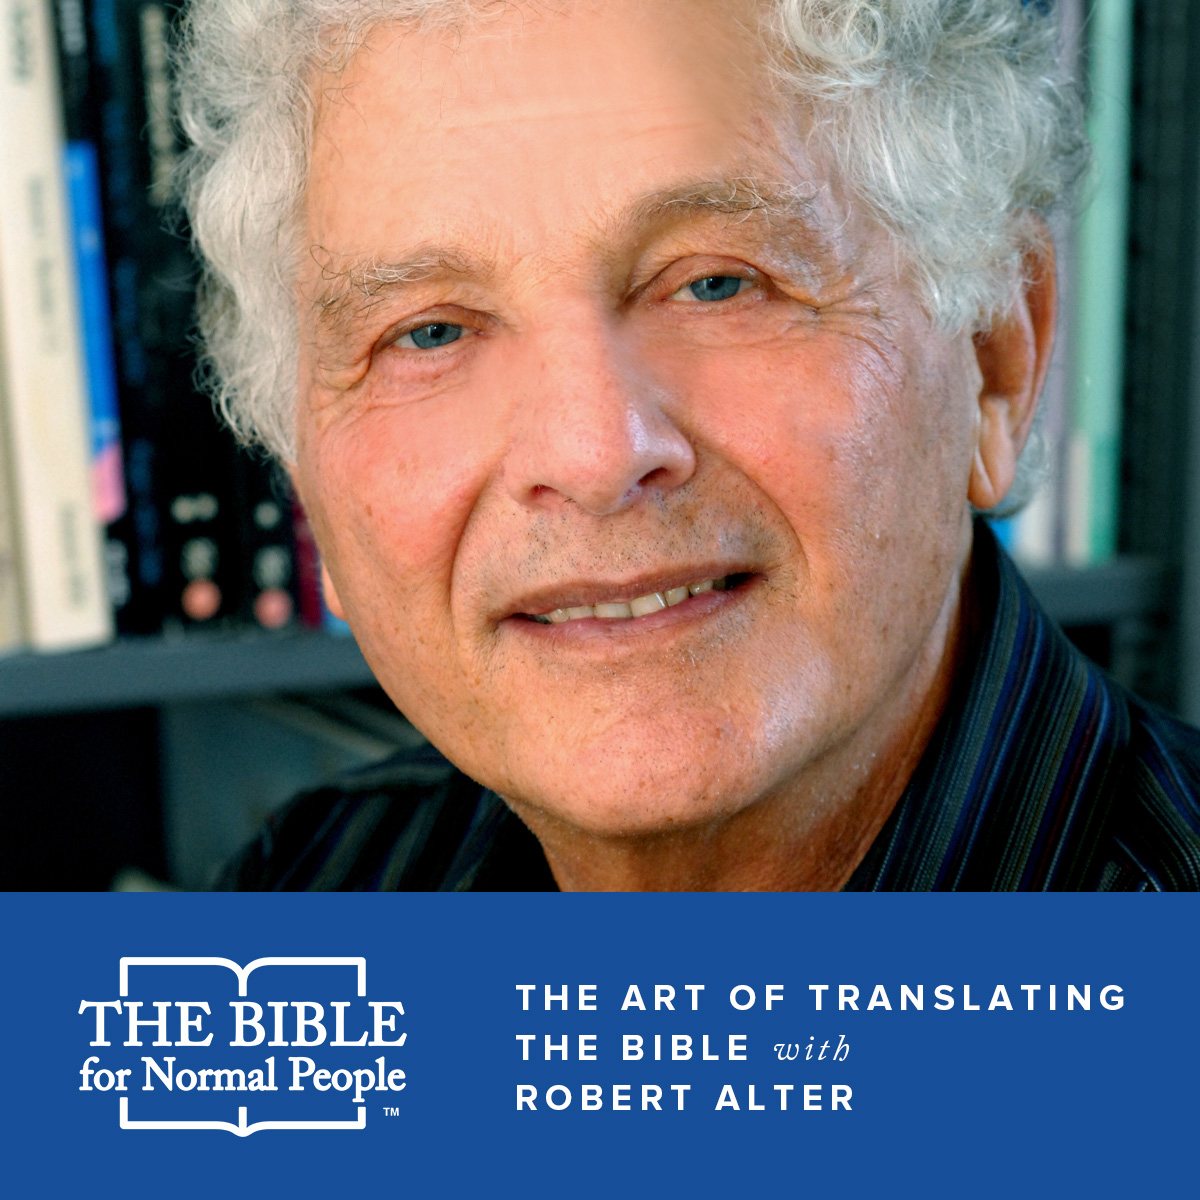 Interview with Robert Alter: The Art of Translating the Bible